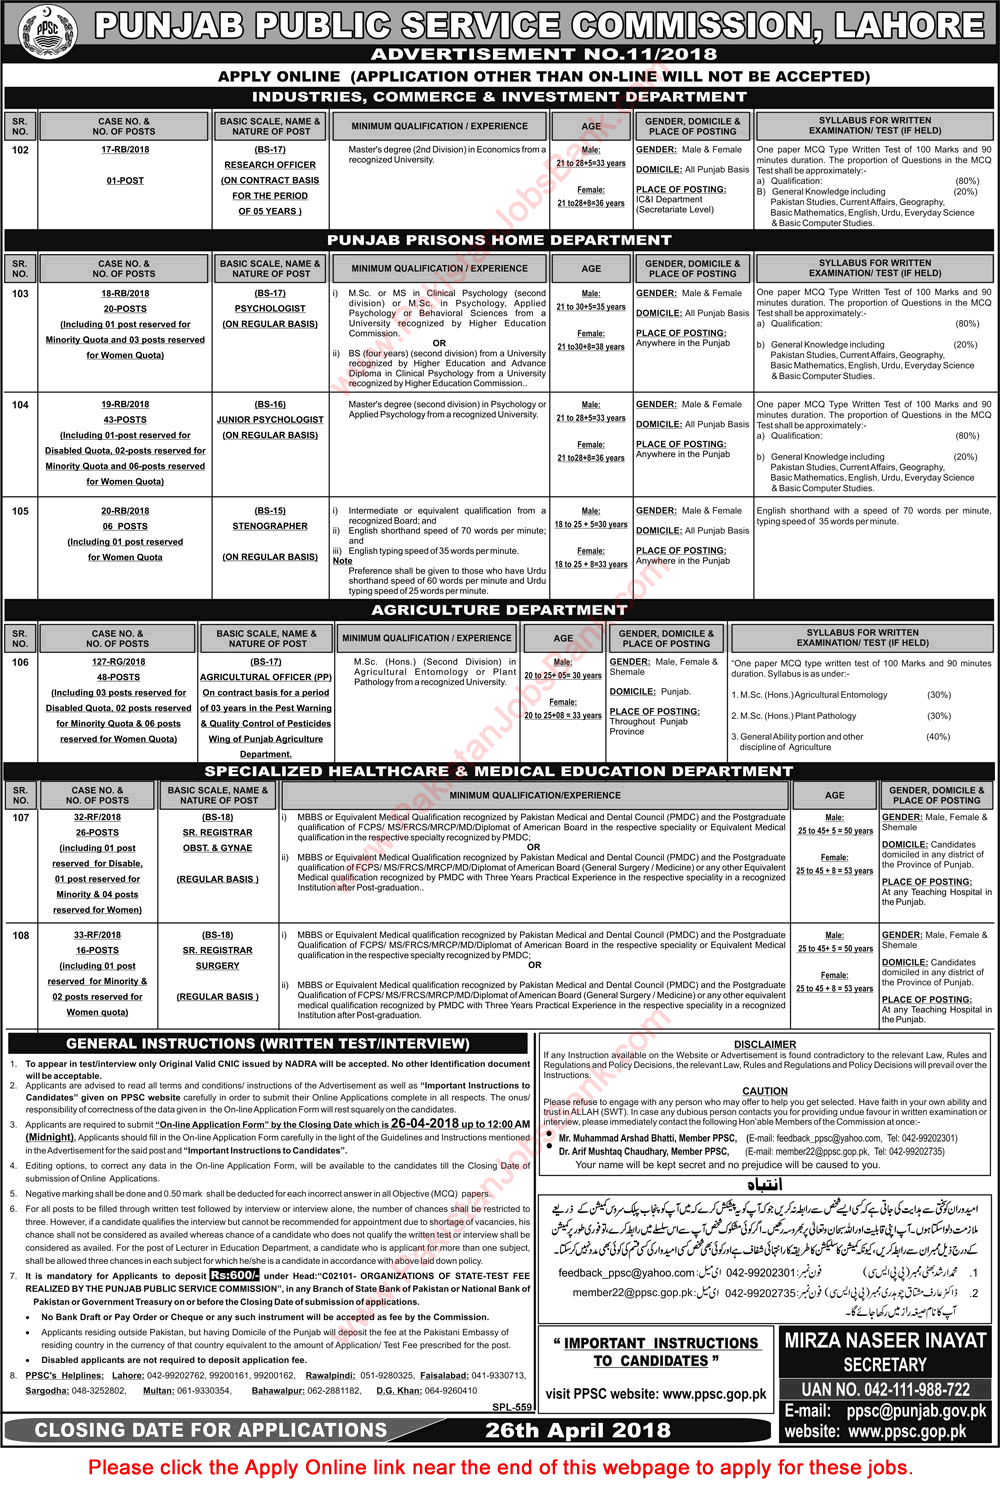 PPSC Jobs April 2018 Apply Online Consolidated Advertisement No 11/2018 Latest